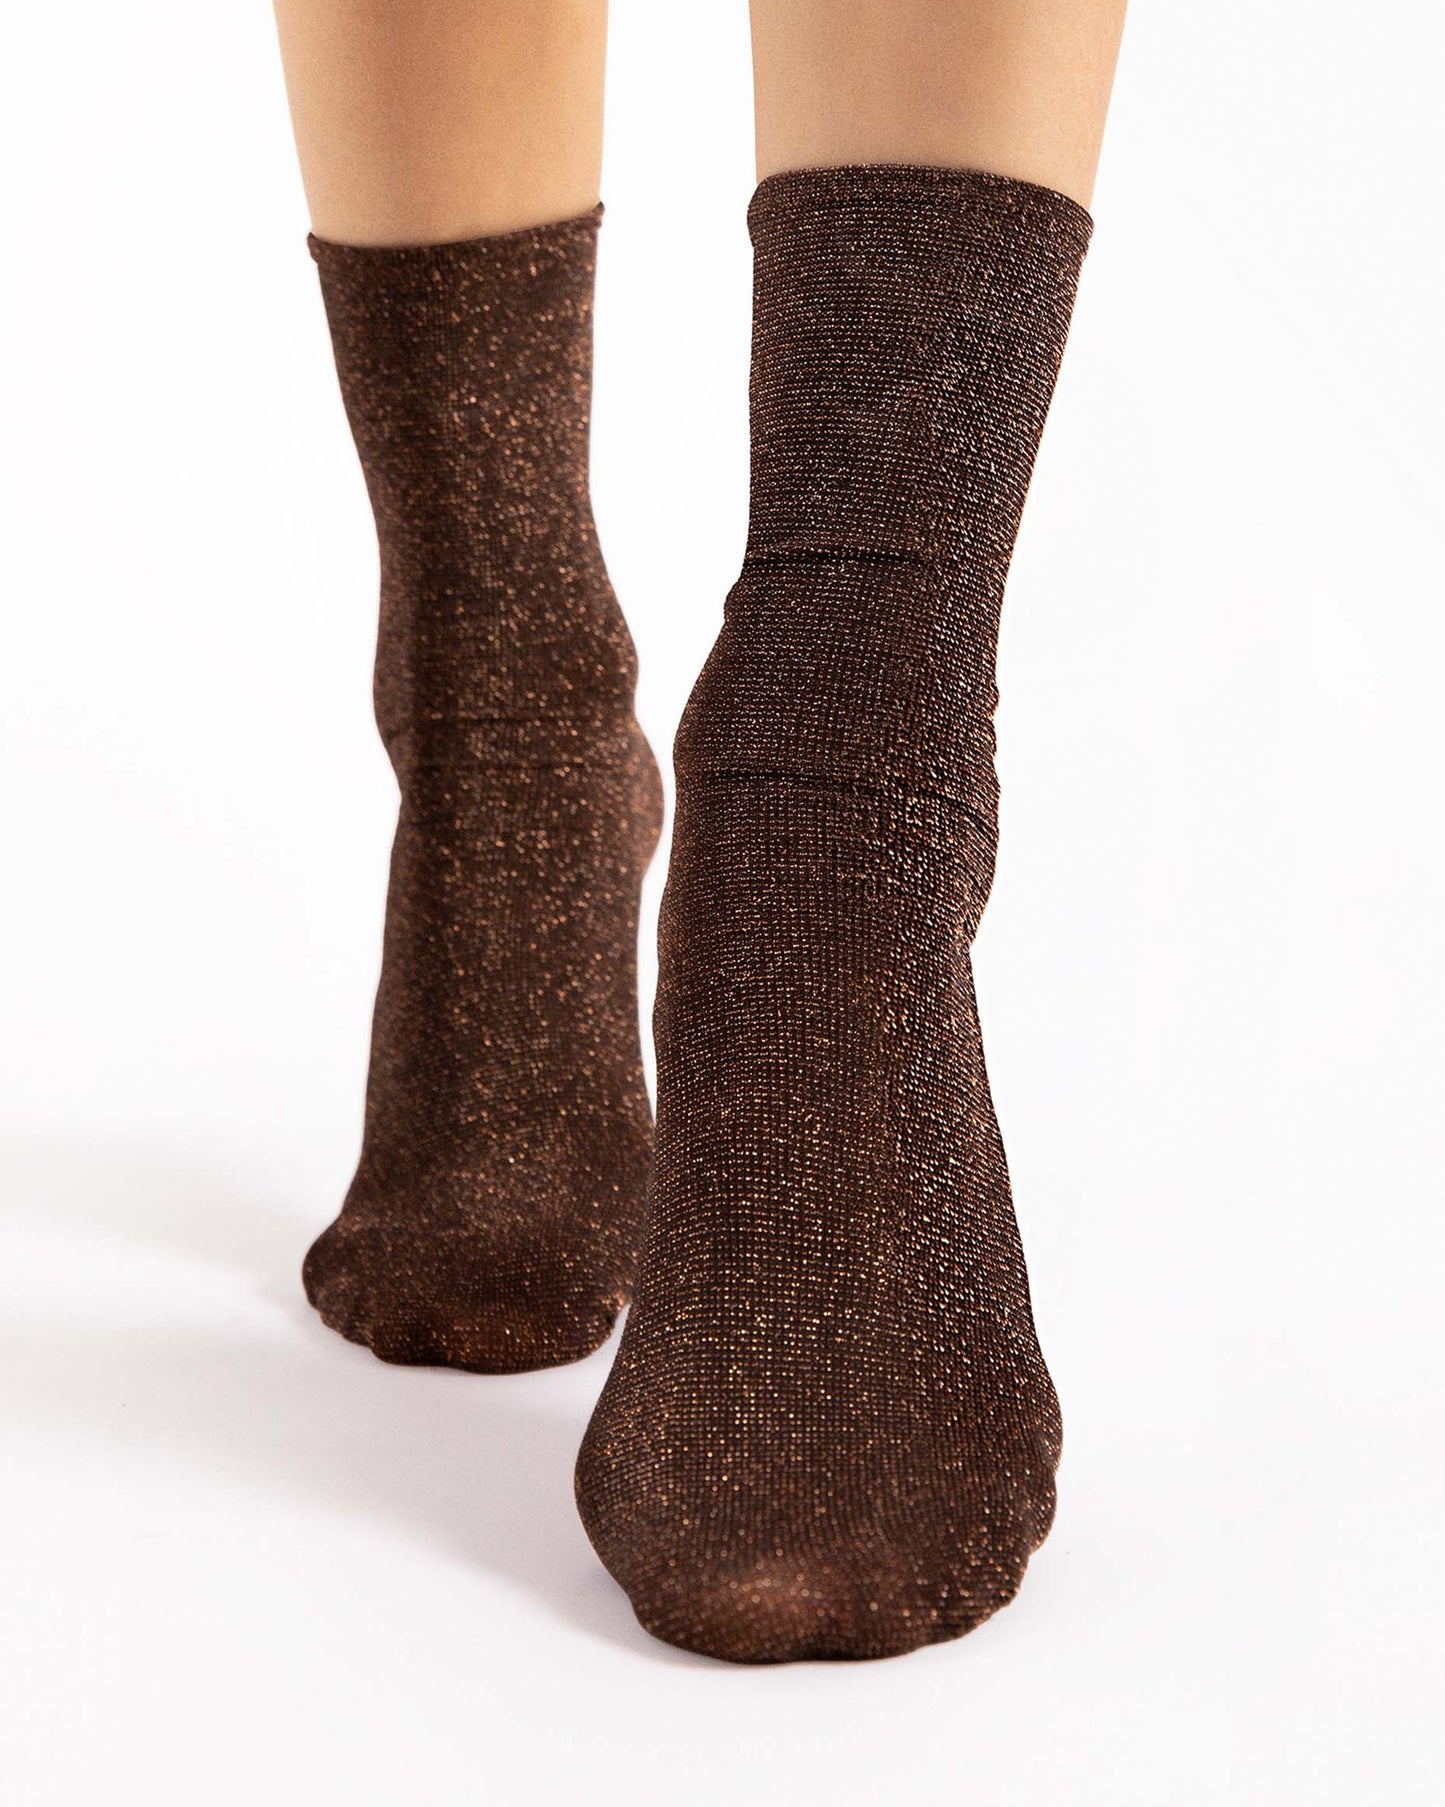 Fiore Bestie Socks - Black opaque tube ankle socks with sparkly copper bronze lurex woven throughout.